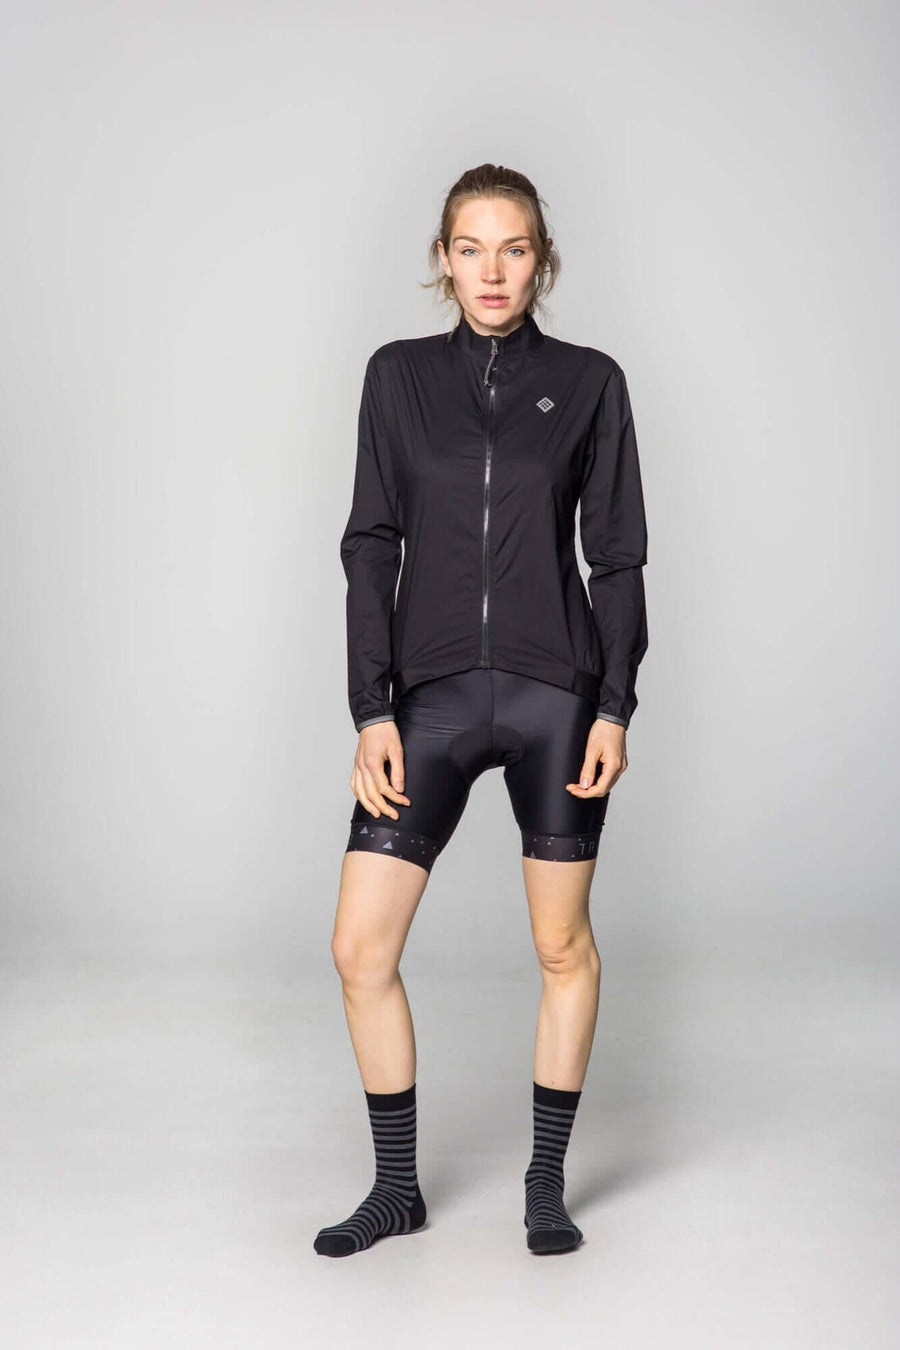 Women‘s - KLEEN Nul Jacken % OUTLET ARCHIV 1st Edt. Anthracite Frühjahr / Sommer Gravel Herbst / Winter jacken Jacken & Westen Jacken & Westen293 L M Mountainbike PFC Free PRO - Tight - Race Cut Recycled Polyamide Road & Gravel S spo-default spo-disabled spo-notify-me-disabled tops Winter-Guide315 Women XS